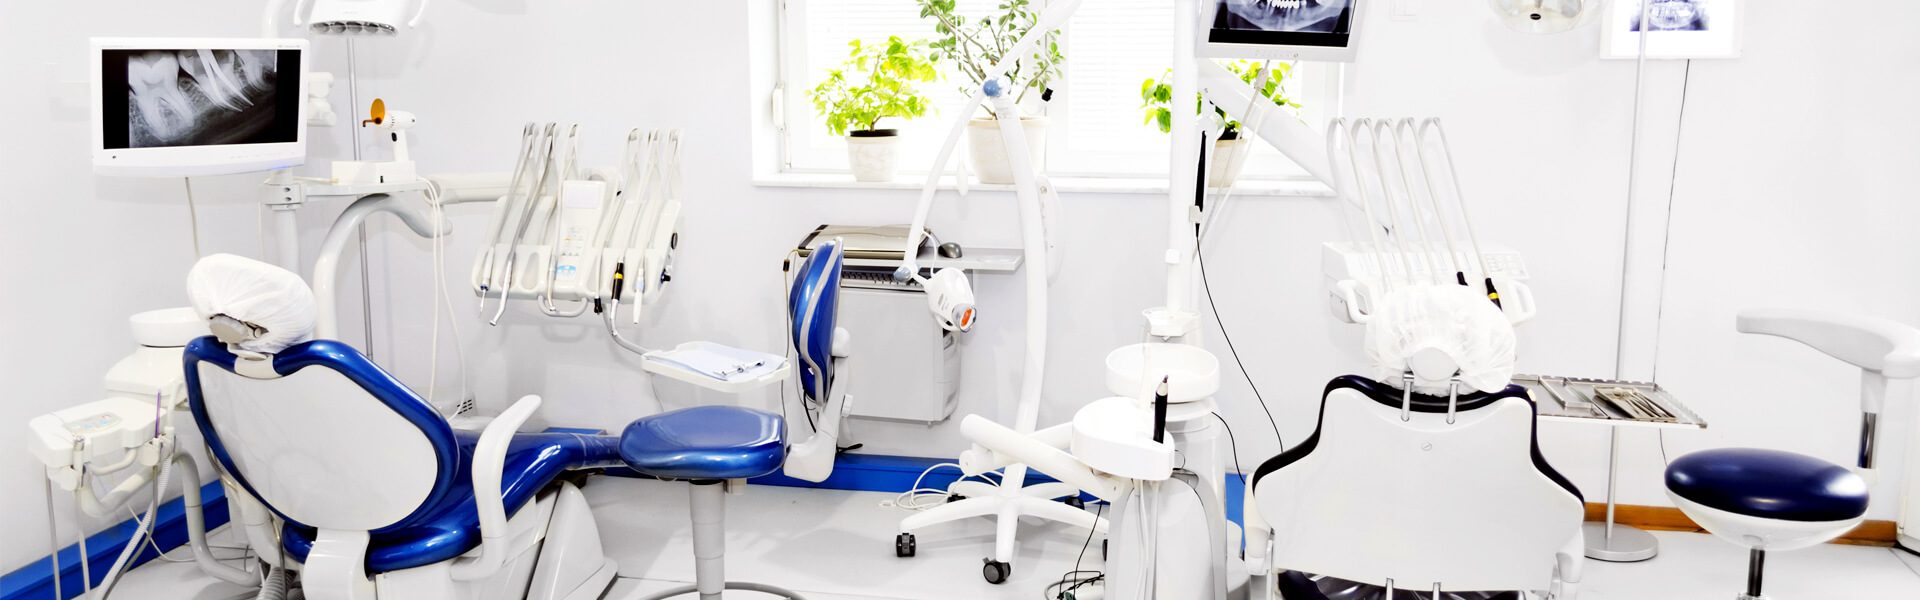 Choosing a Dental Office in 2020, or Right Now!